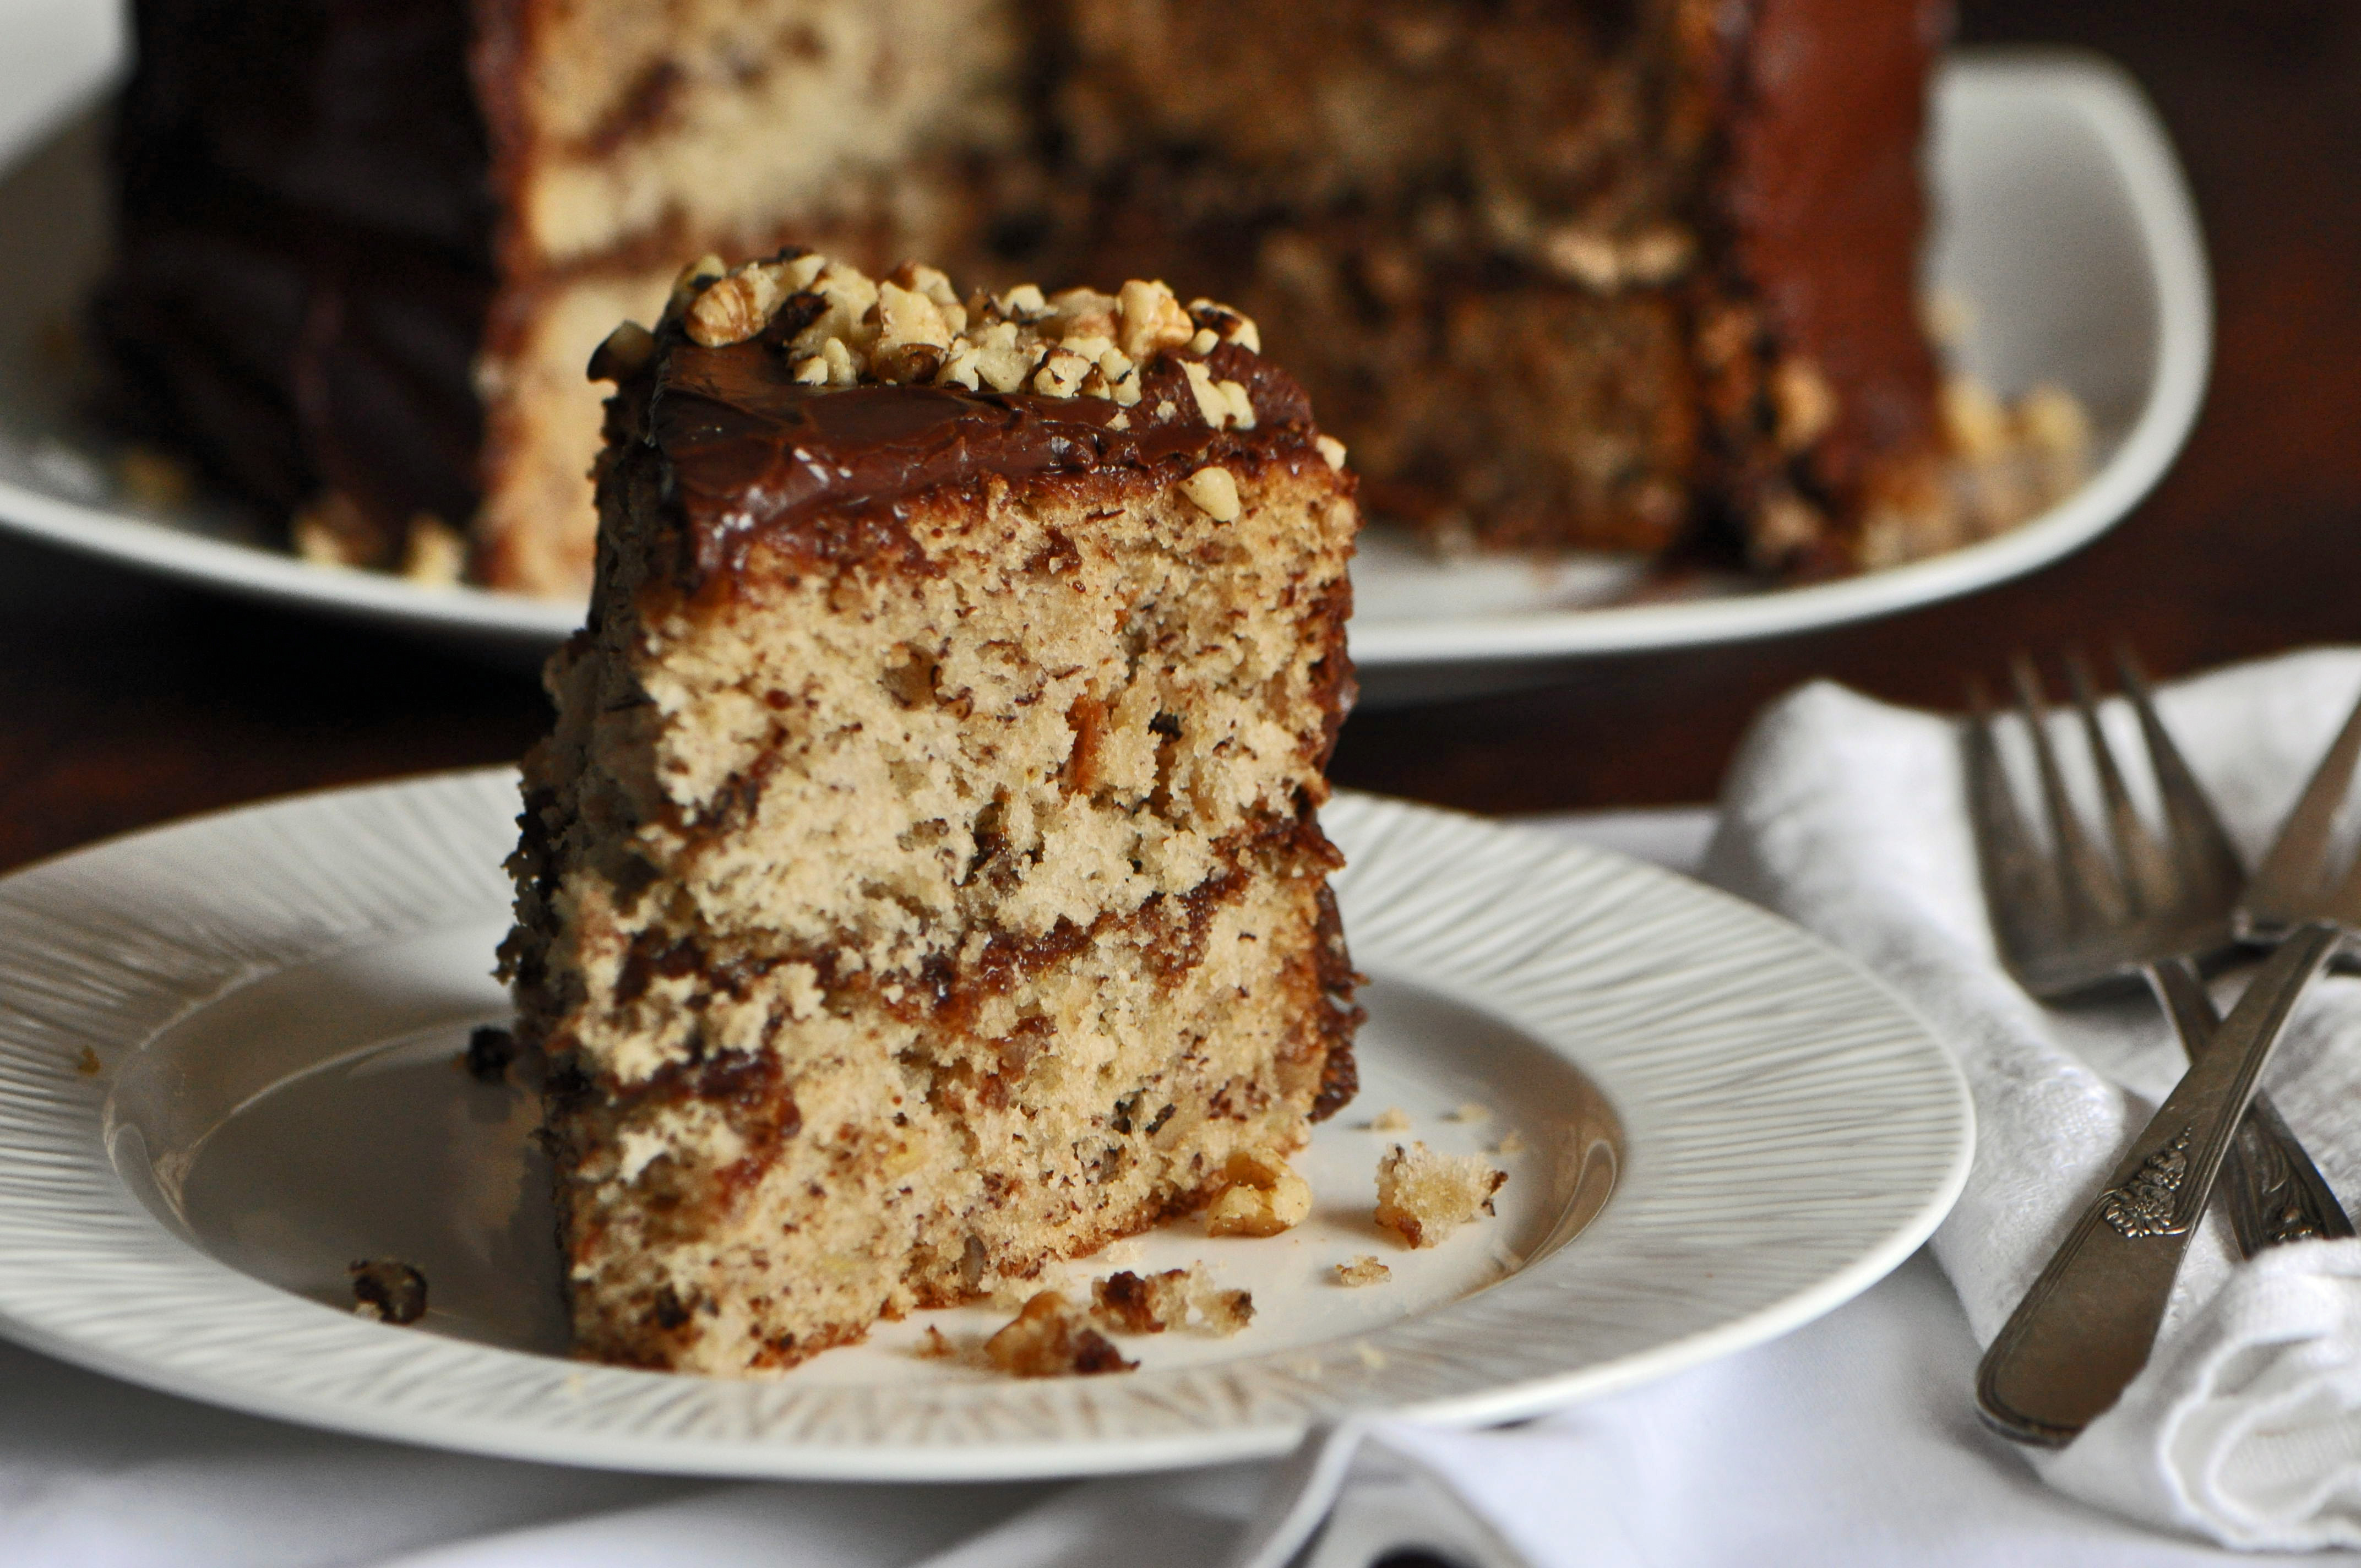 Buttermilk Banana Cake with Coffee-Chocolate Frosting Recipe